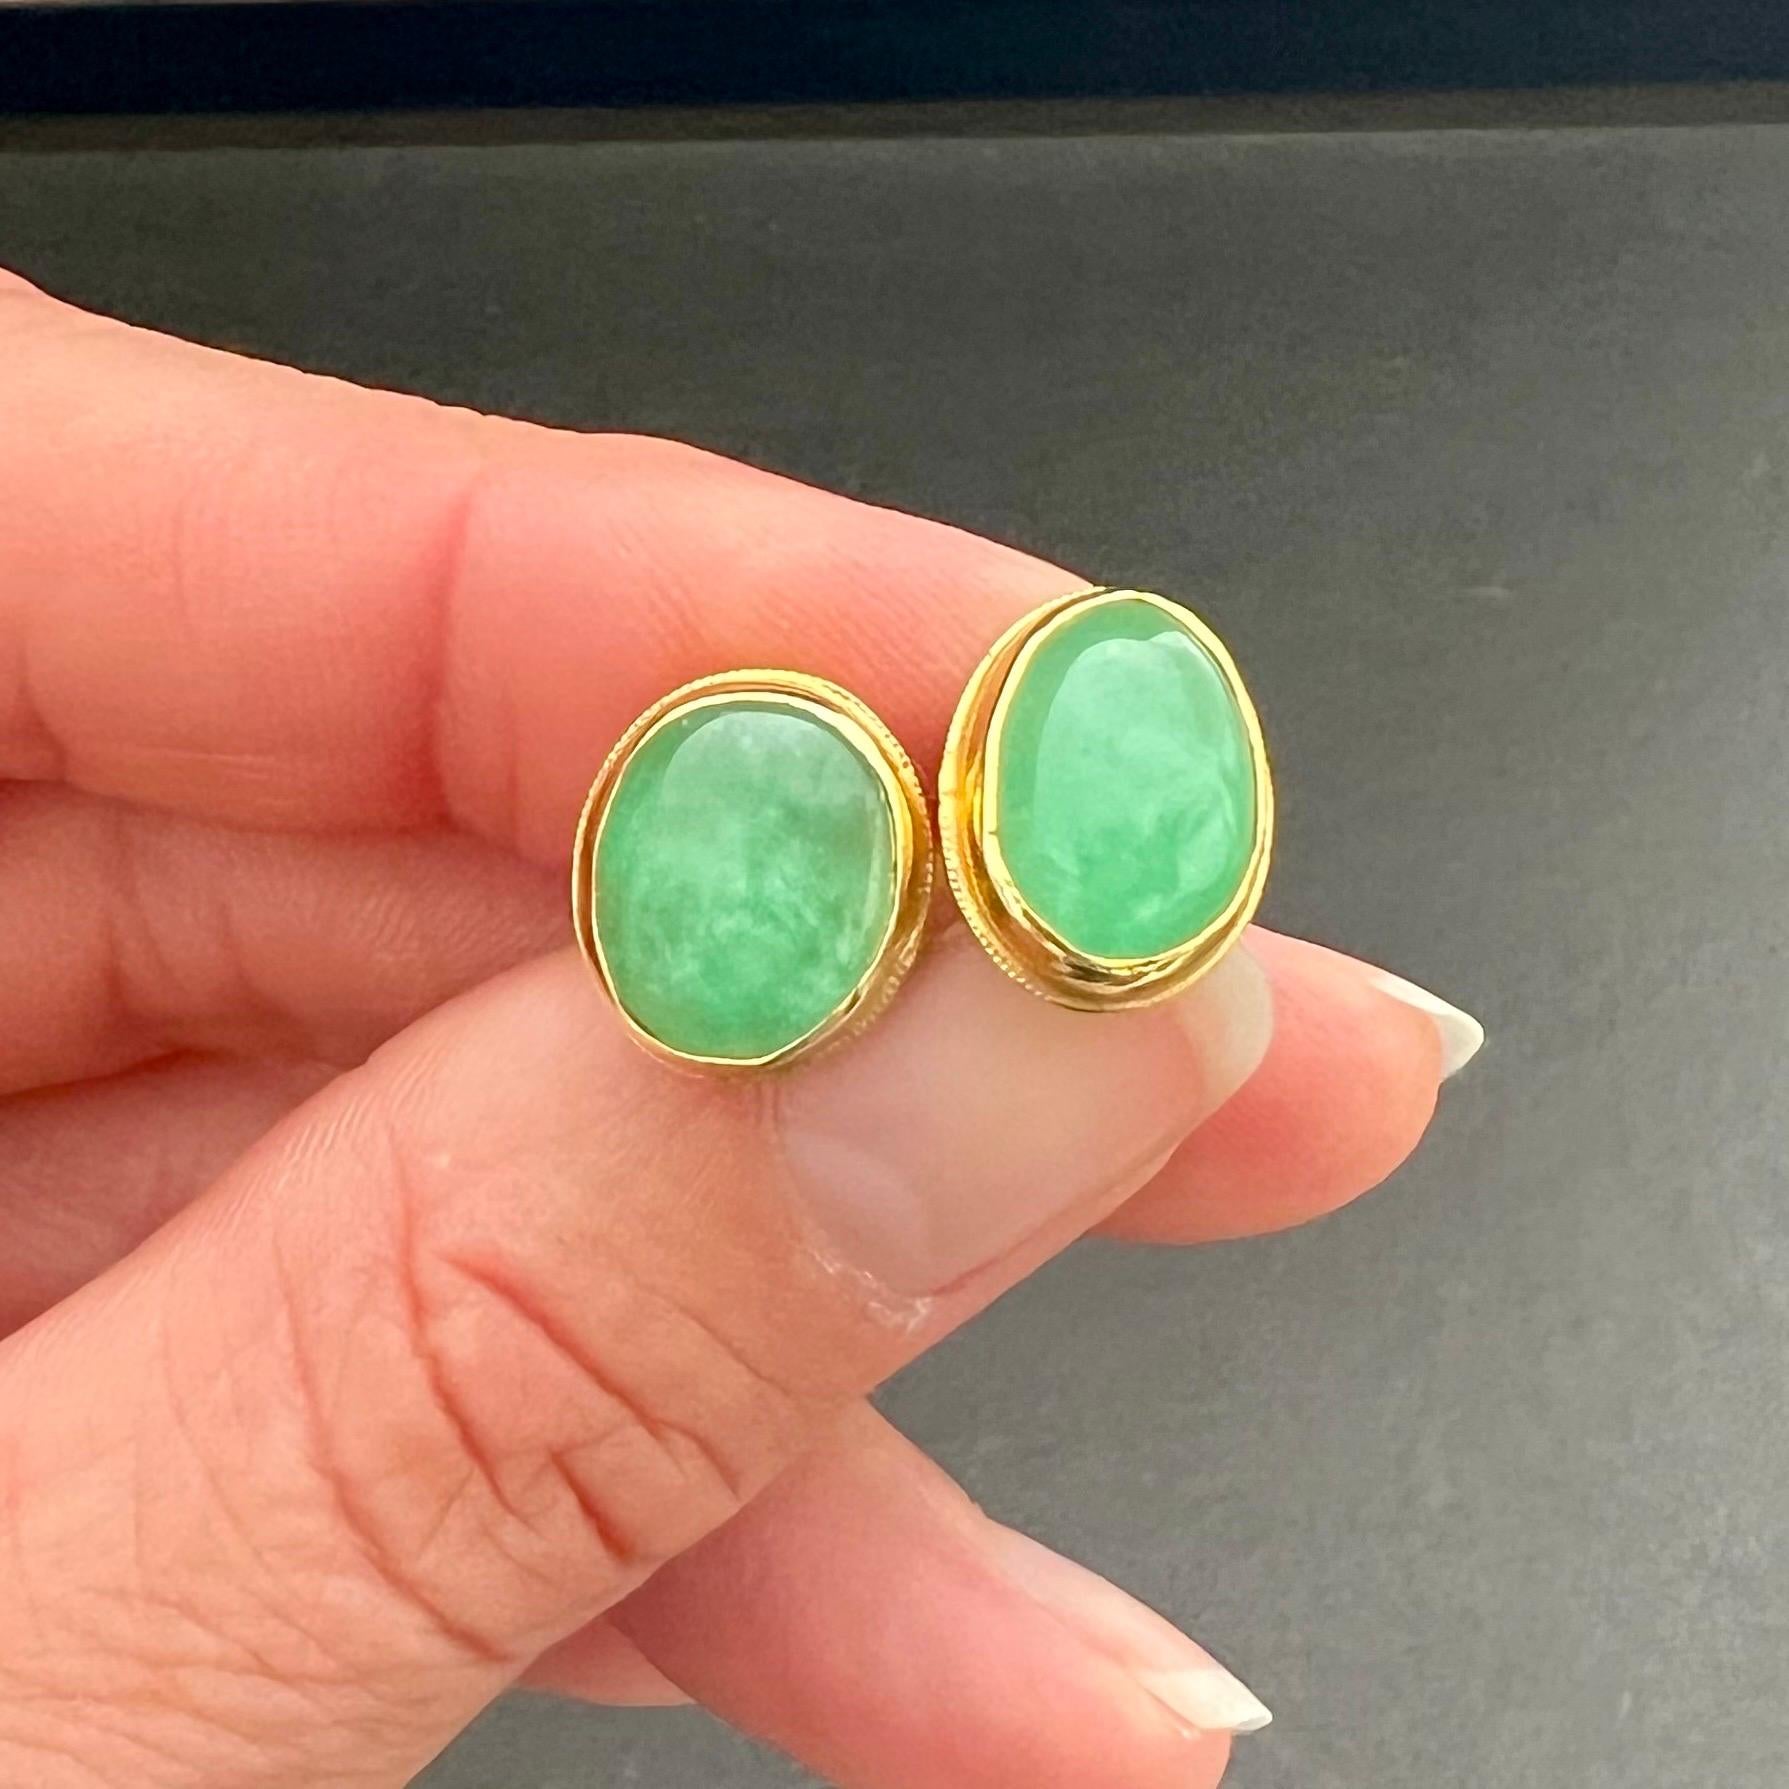 A lovely vintage pair of green jadeite jade earrings. The natural jadeite jade is bezel set in an 18 karat yellow gold frame. The earrings are designed with an oval cabochon cut green translucent jade stone. The jade has an immense vivid green color